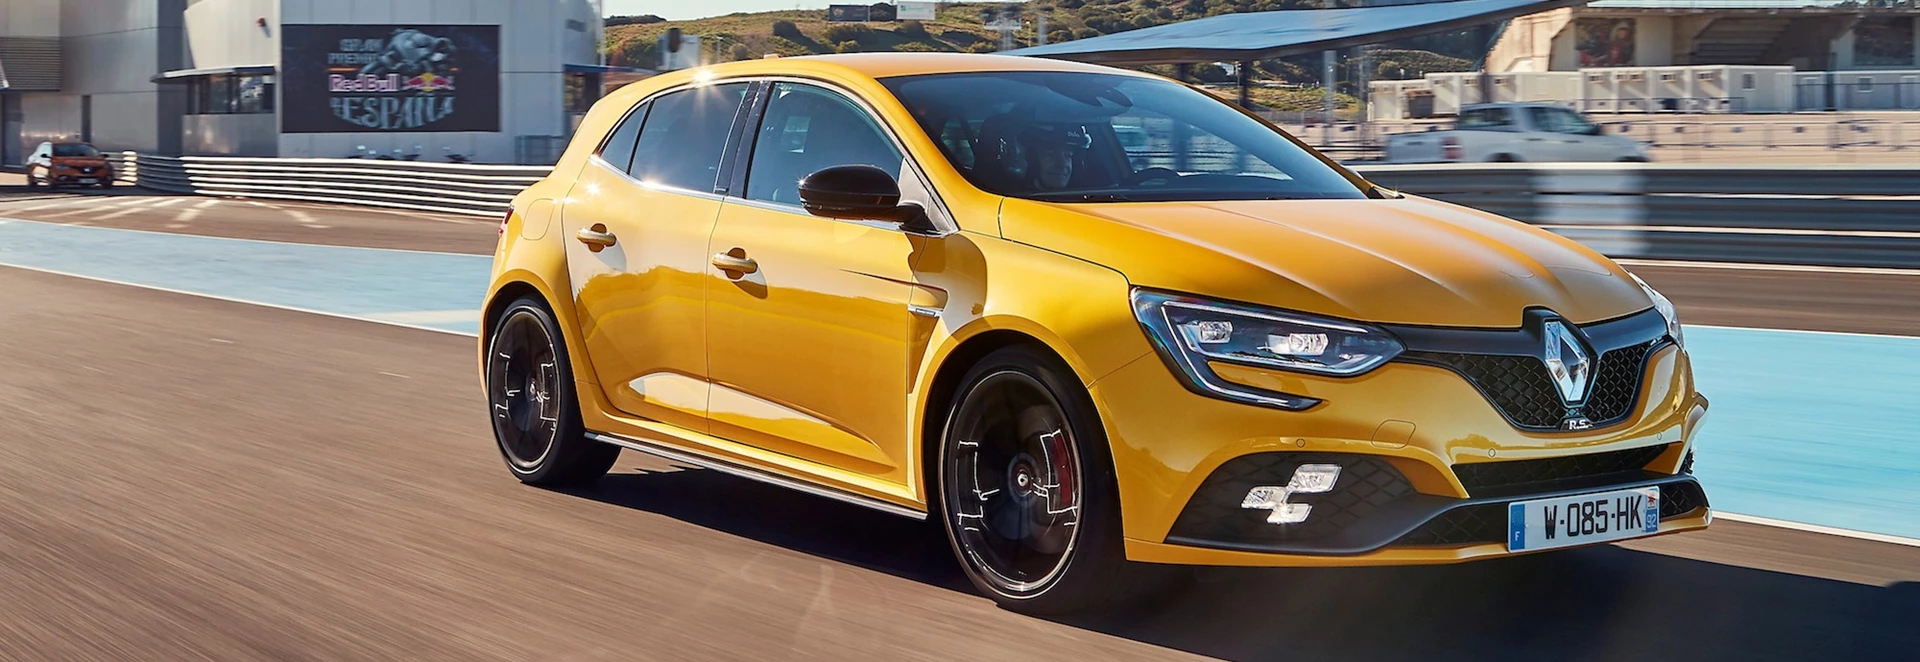 6 Awesome things we learned from the Renault Megane RS 